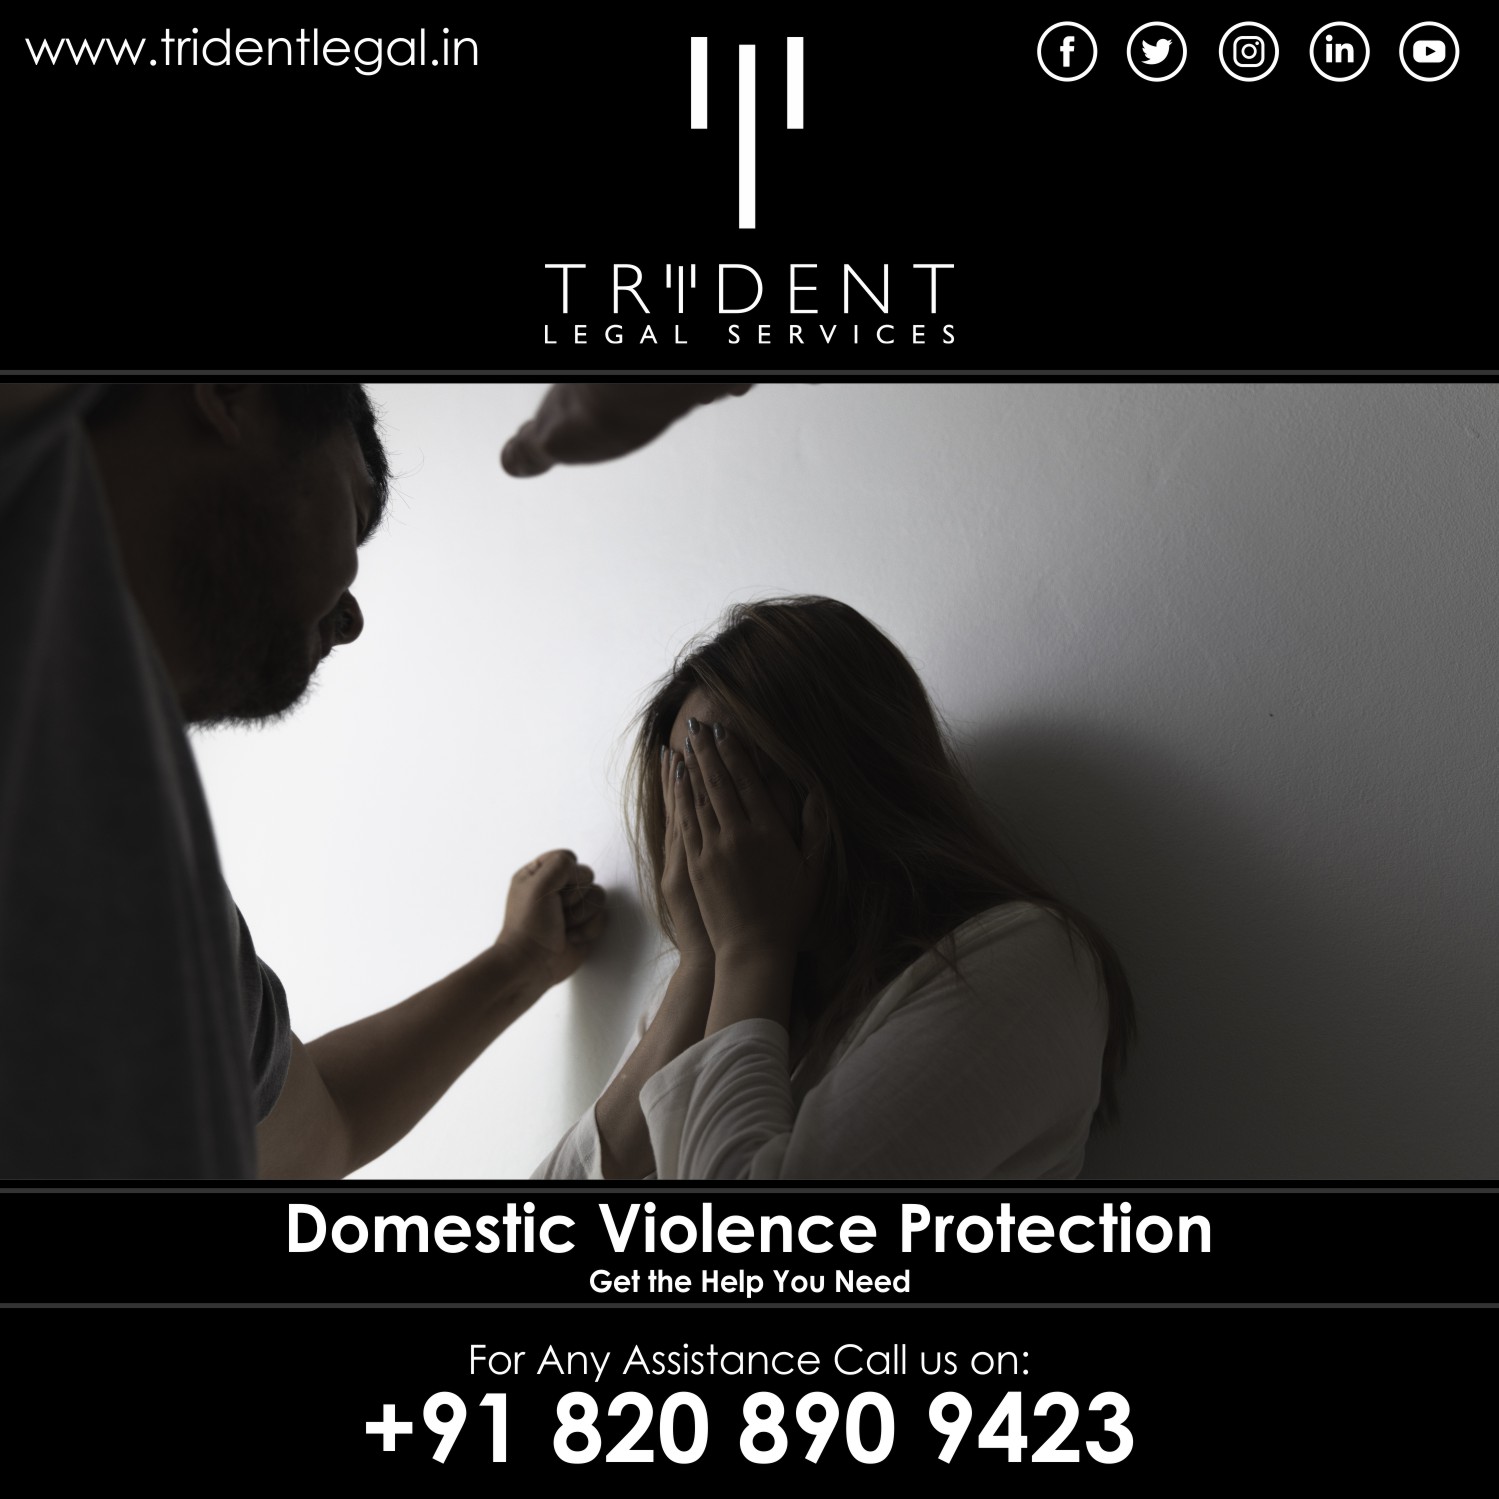 Domestic Violence Protection in Pune